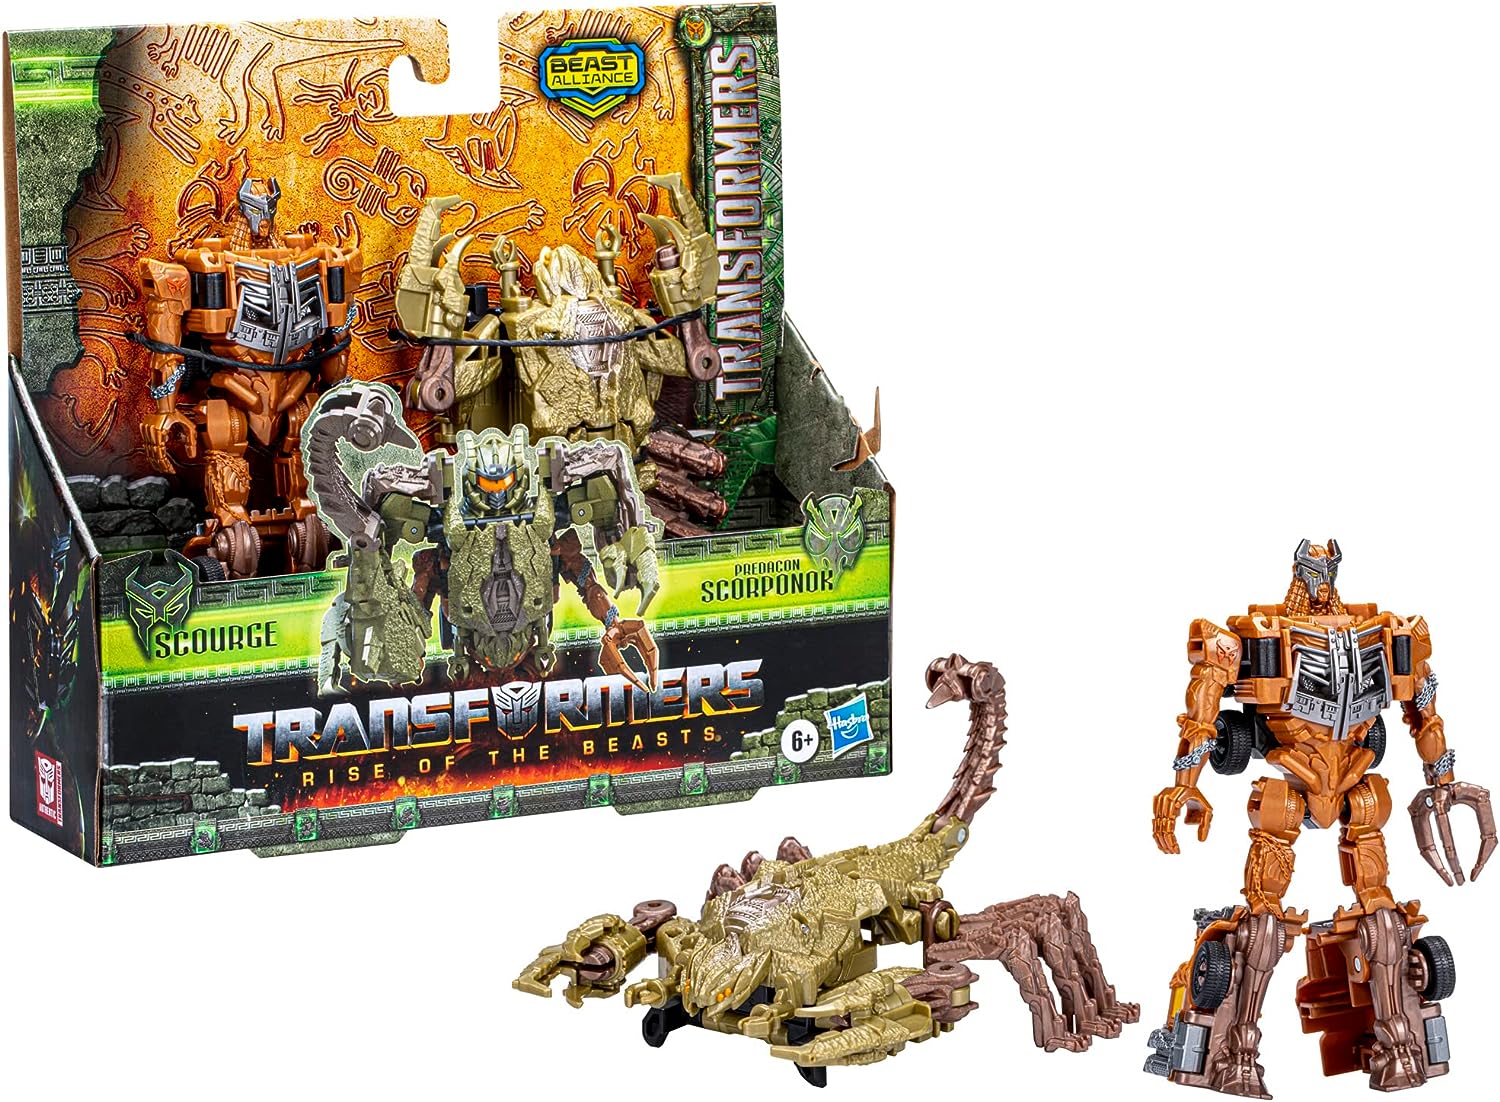 Toy News: New Rise of the Beasts Product Listings up on